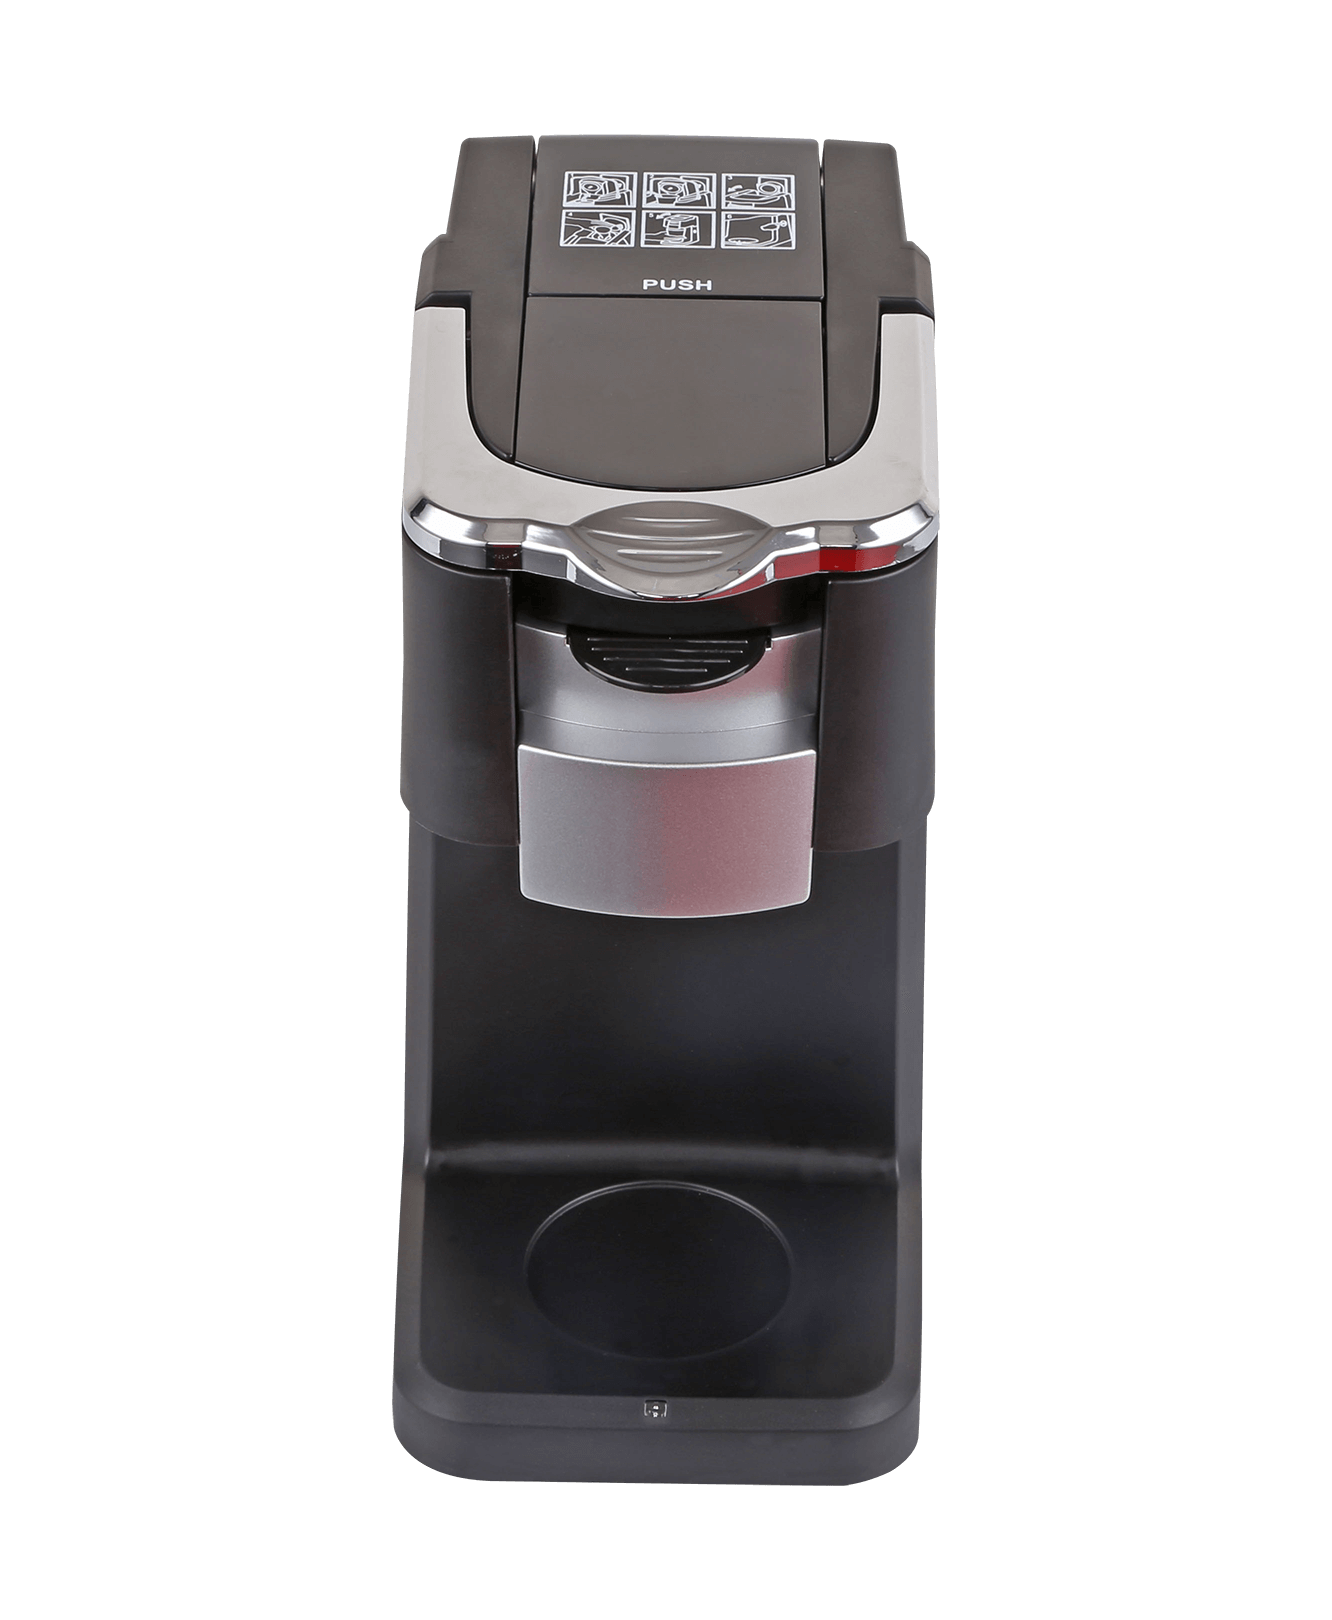 https://martinhenrycoffee.com/wp-content/uploads/2018/09/i360-single-cup-brewer-front.png